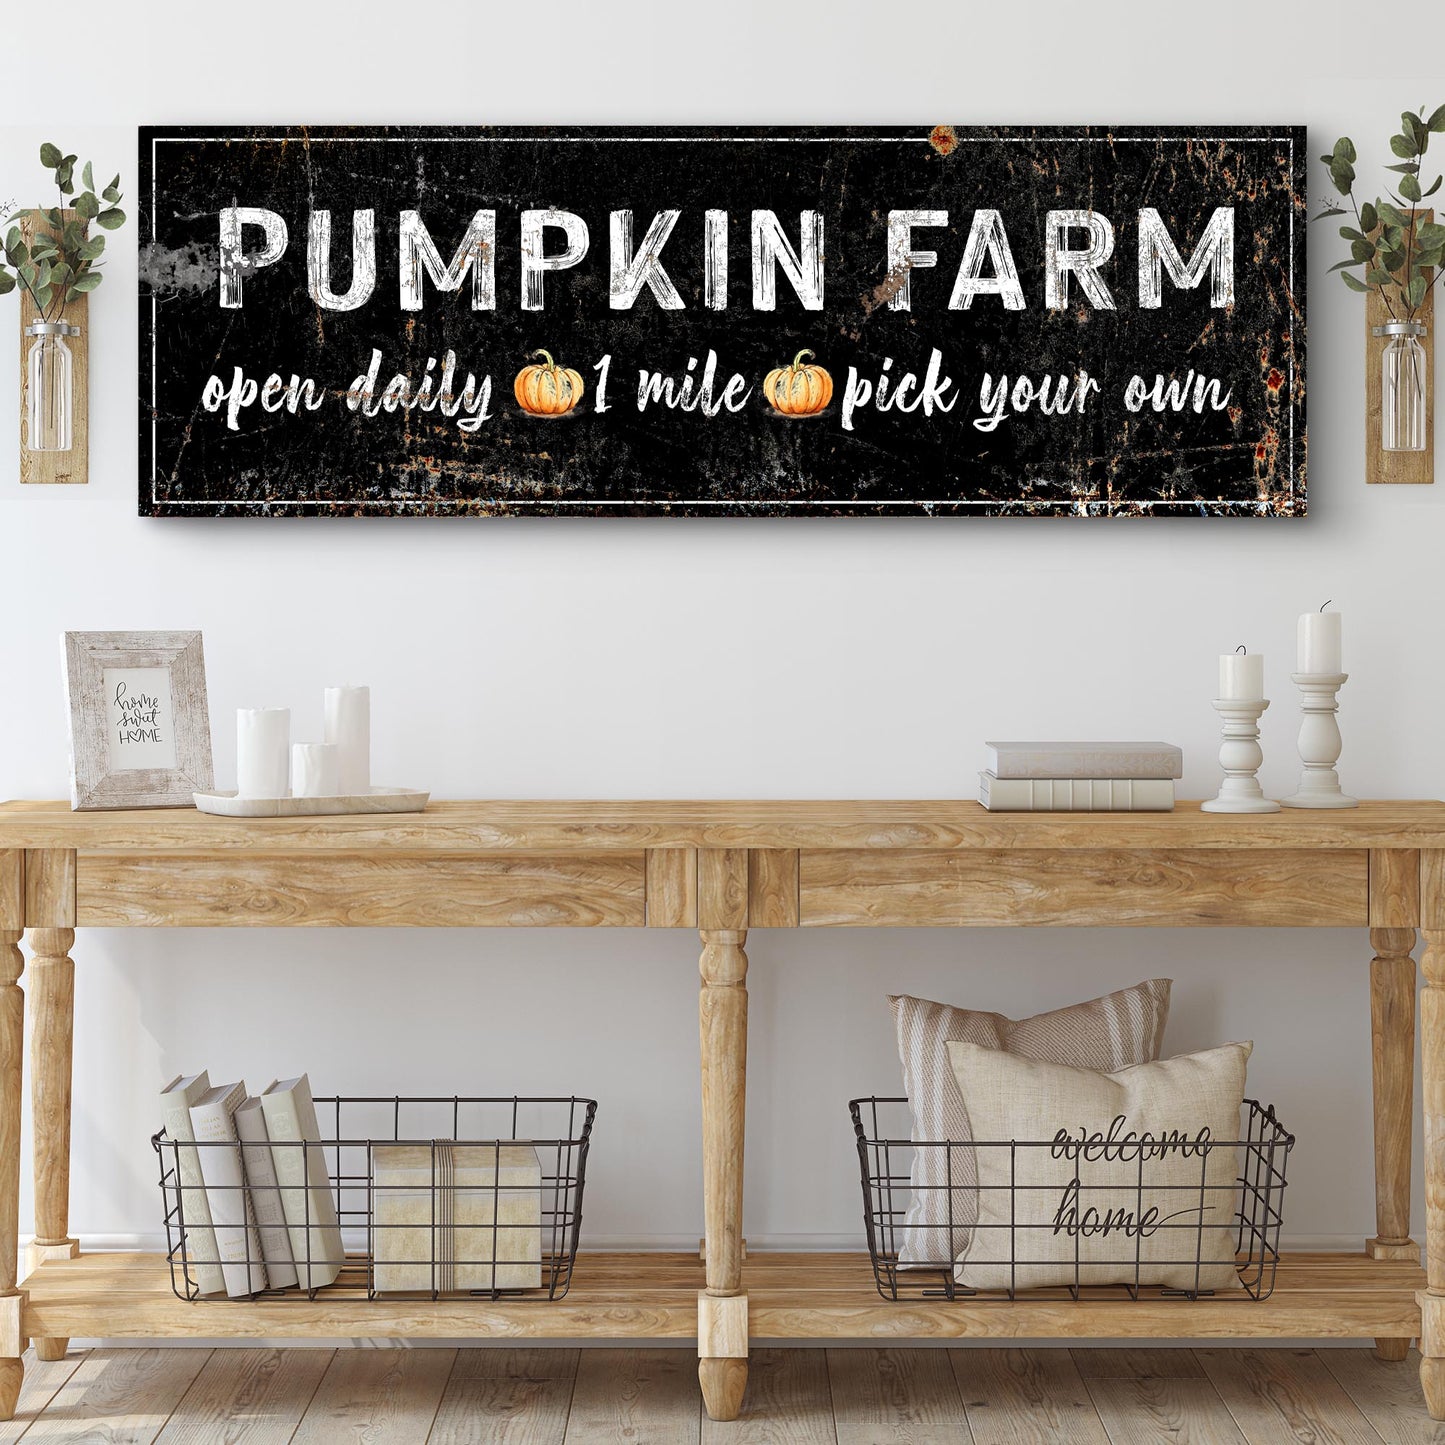 Pumpkin Farm Sign - Image by Tailored Canvases